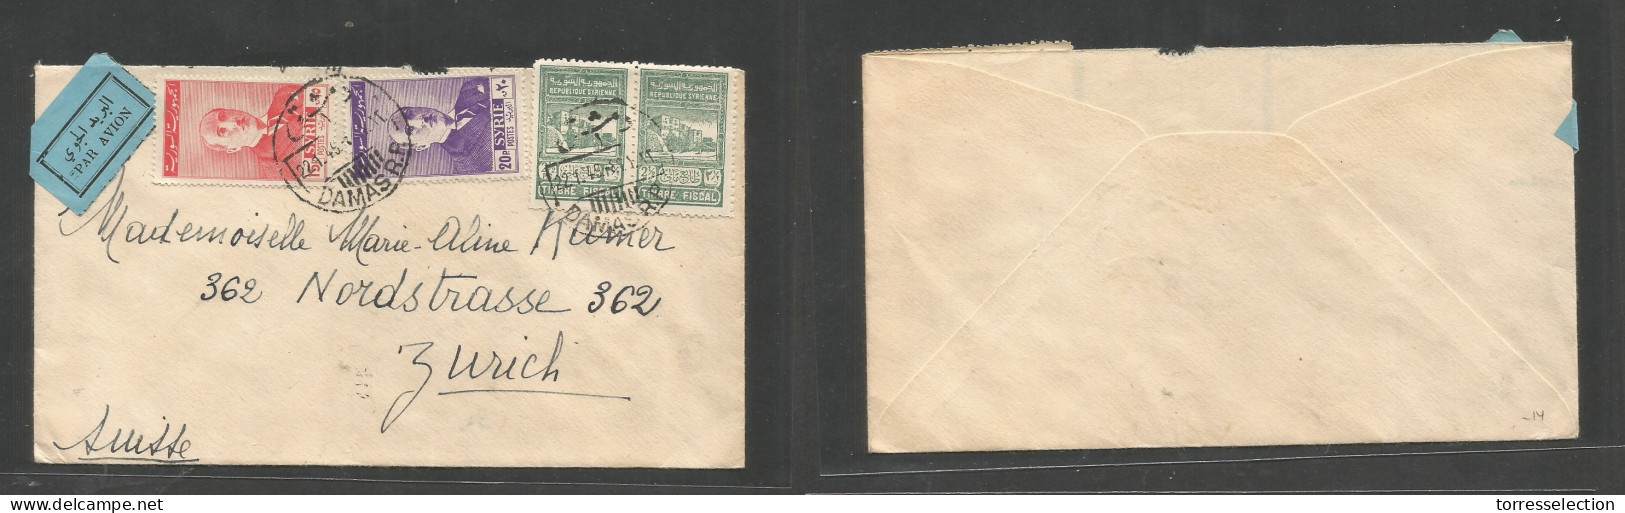 SYRIA. 1949 (22 Jan) Damas - Switzerland, Zurich. Air Multifkd Env Incl Two Fiscal Stamps, Tied Cds. VF Used. - Syrien